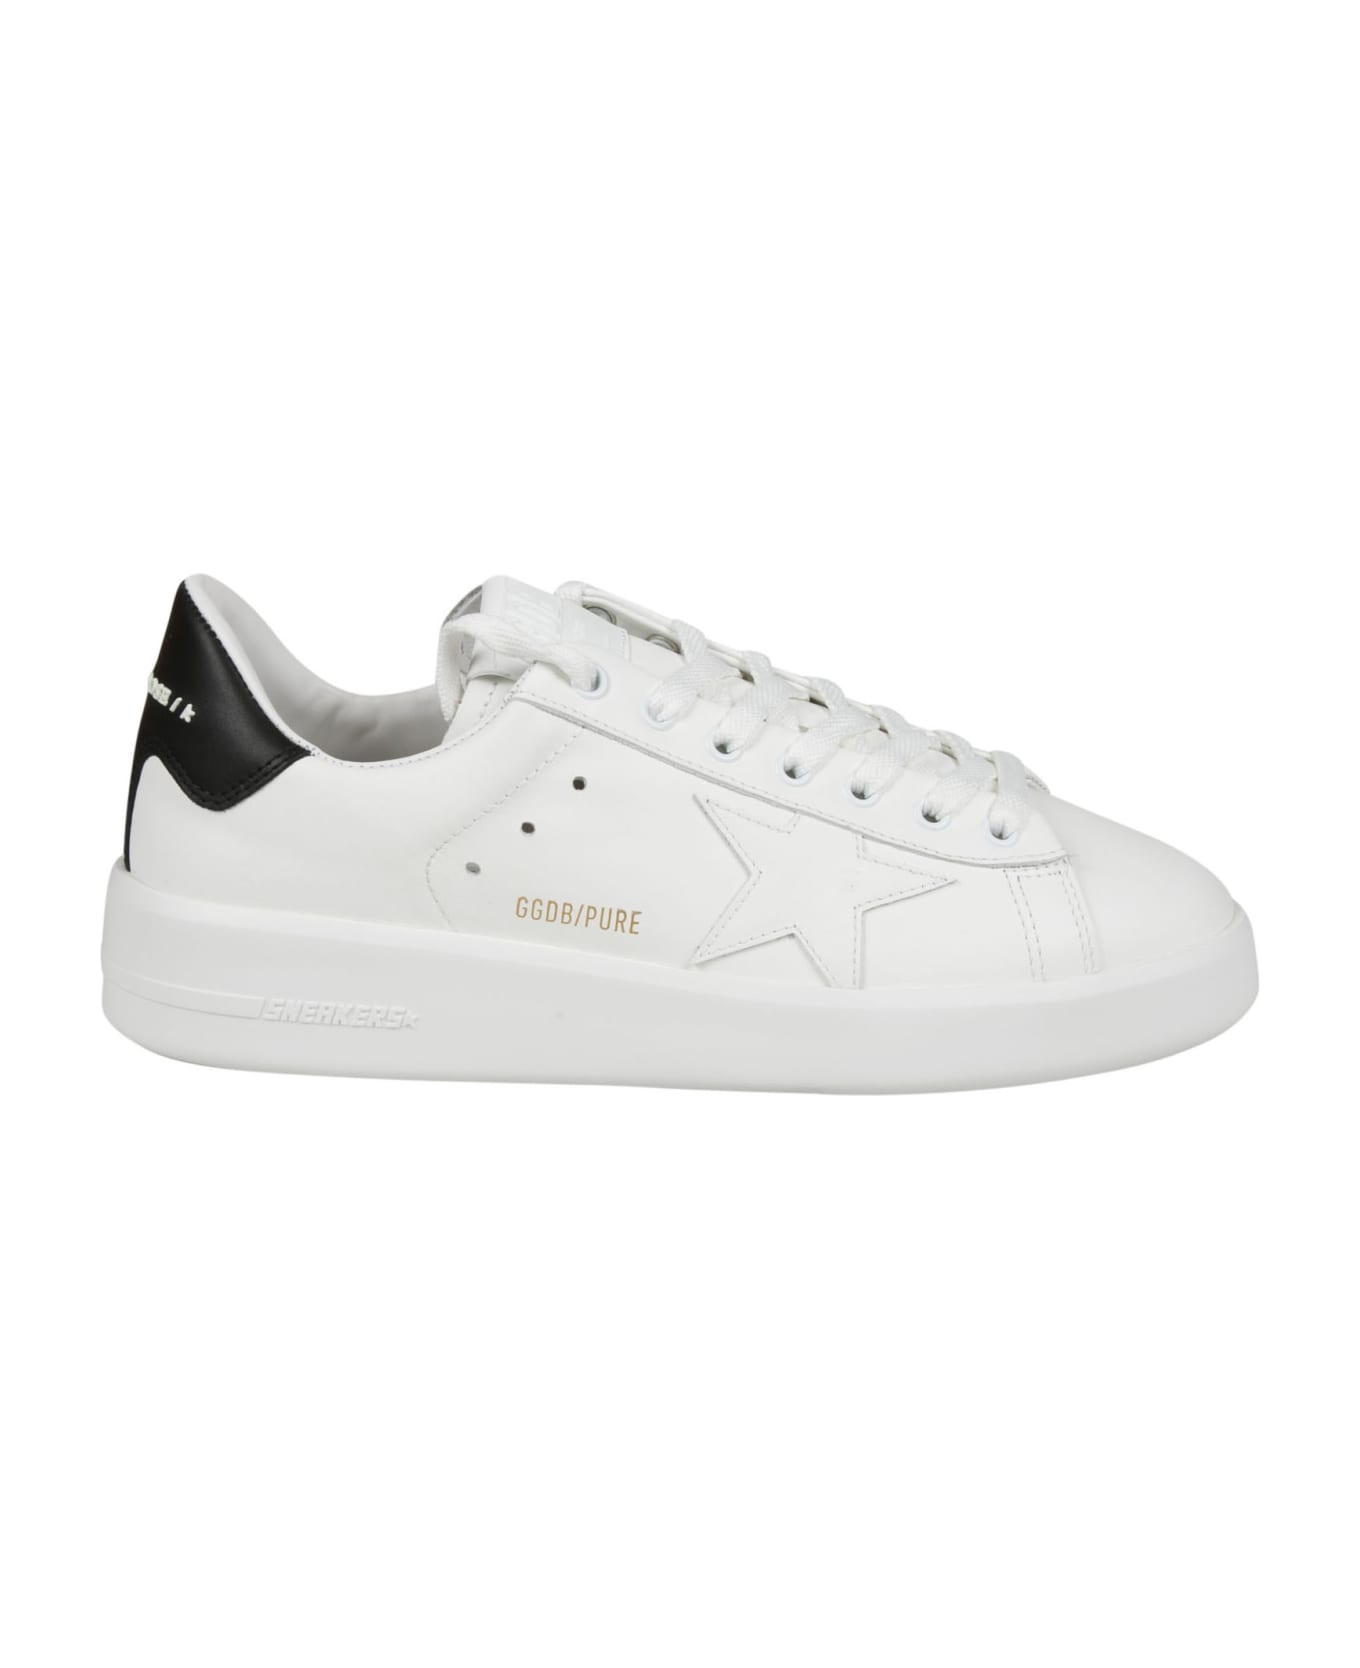 Golden Goose Pure New Sneakers - White/Black